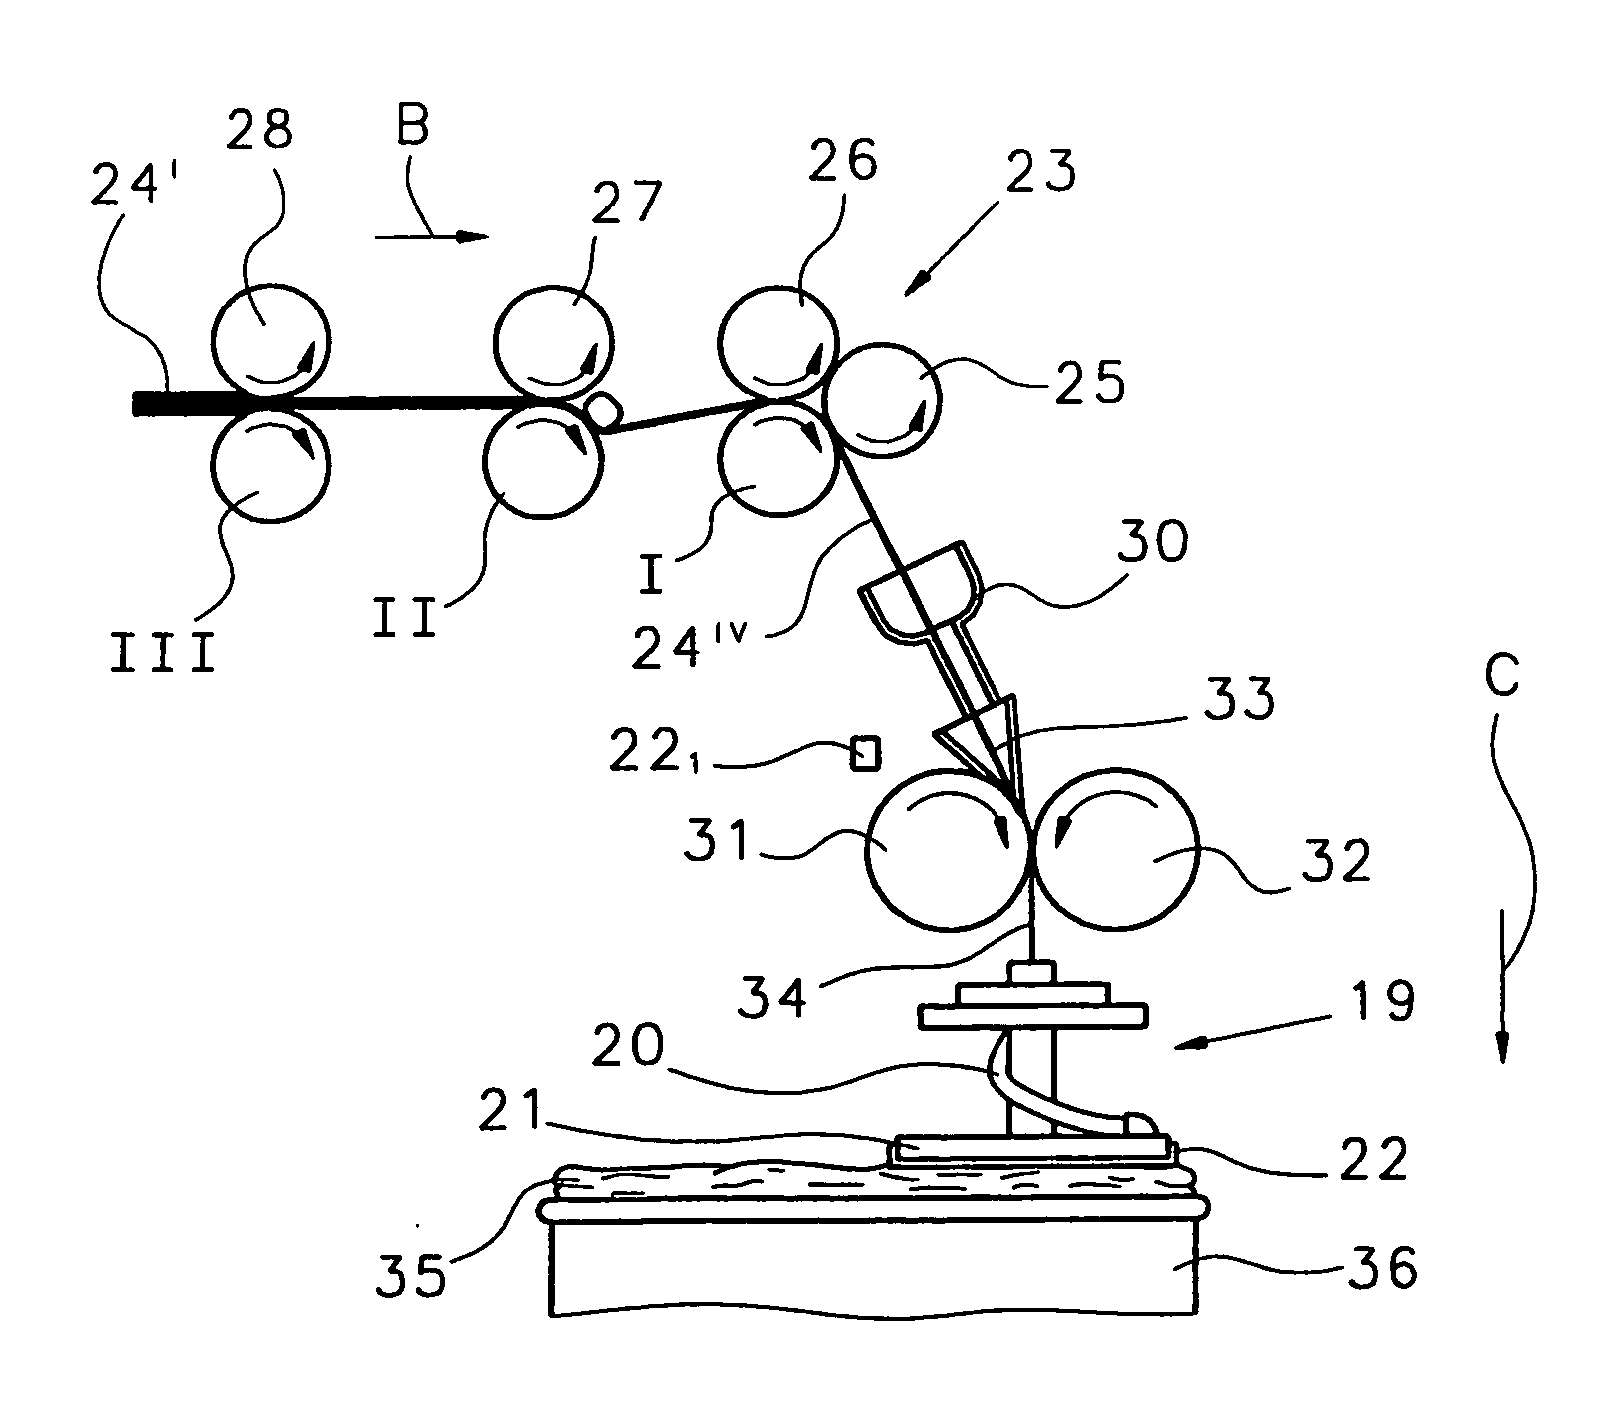 Apparatus on a spinning preparation machine for ascertaining the mass and/or fluctuations in the mass of a fibre material